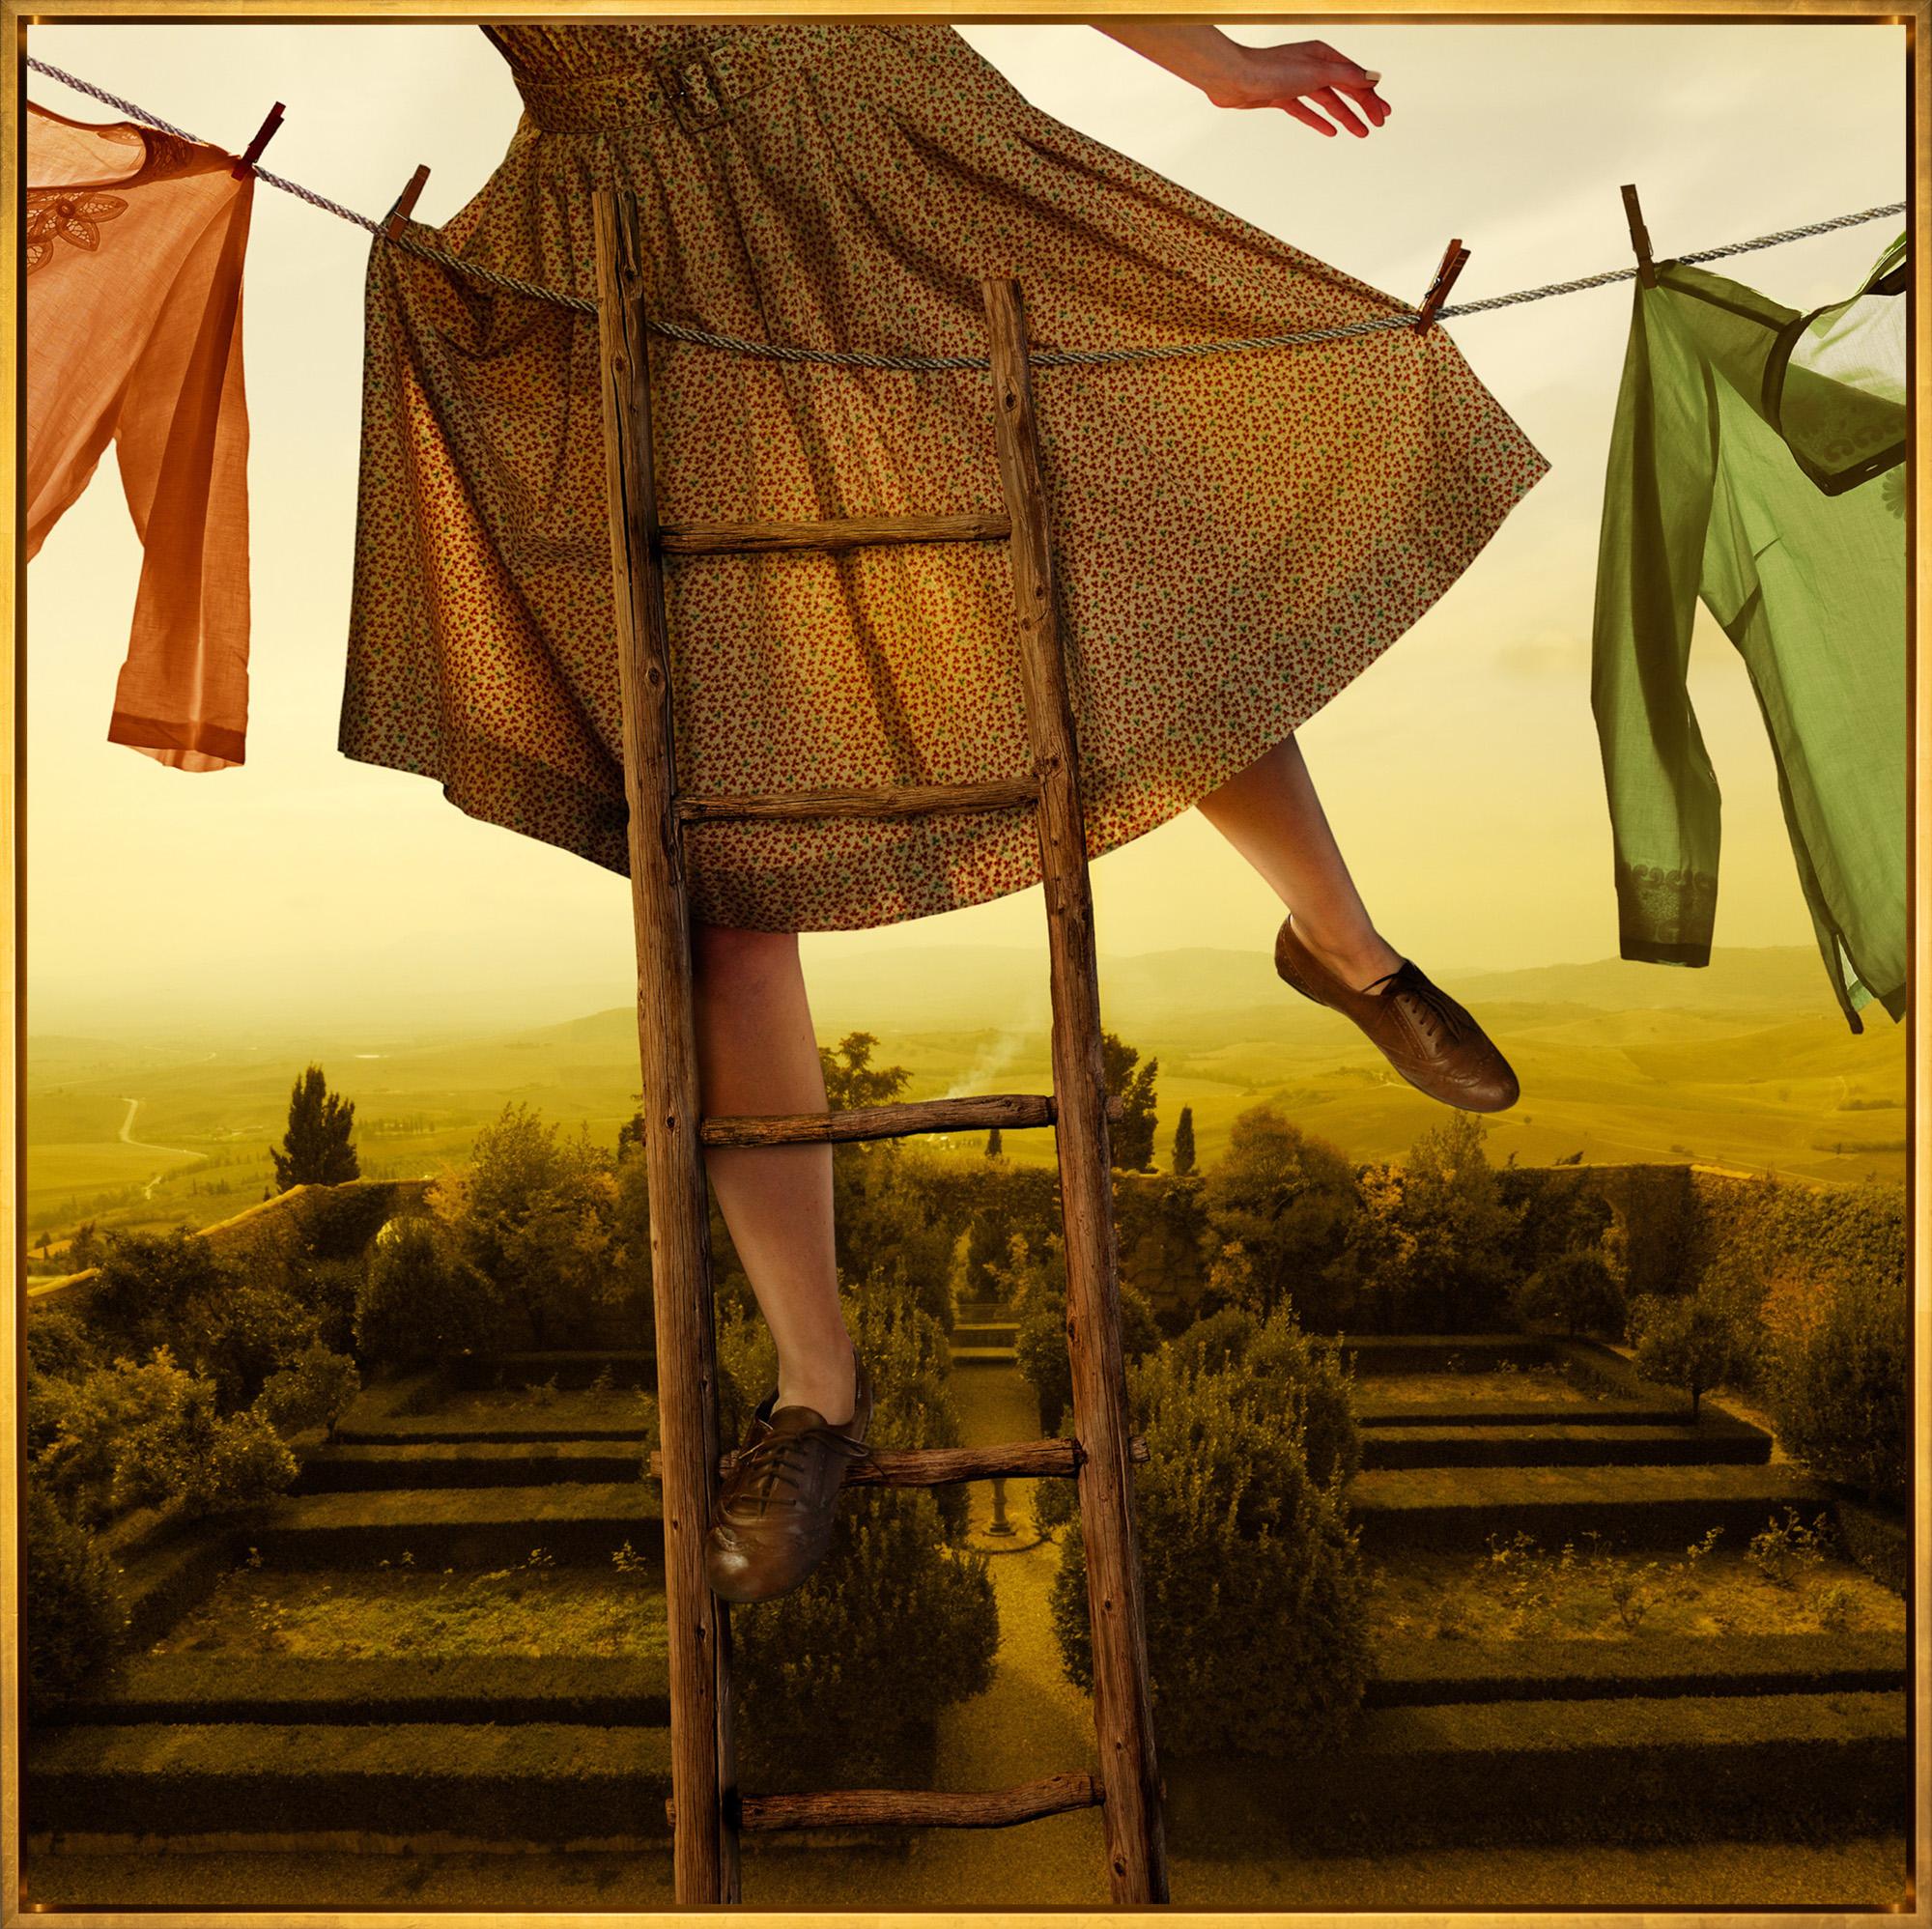 Tom Chambers Landscape Photograph - "Pennants Over Pienza" Contemporary Figurative Framed Photograph on Aluminum